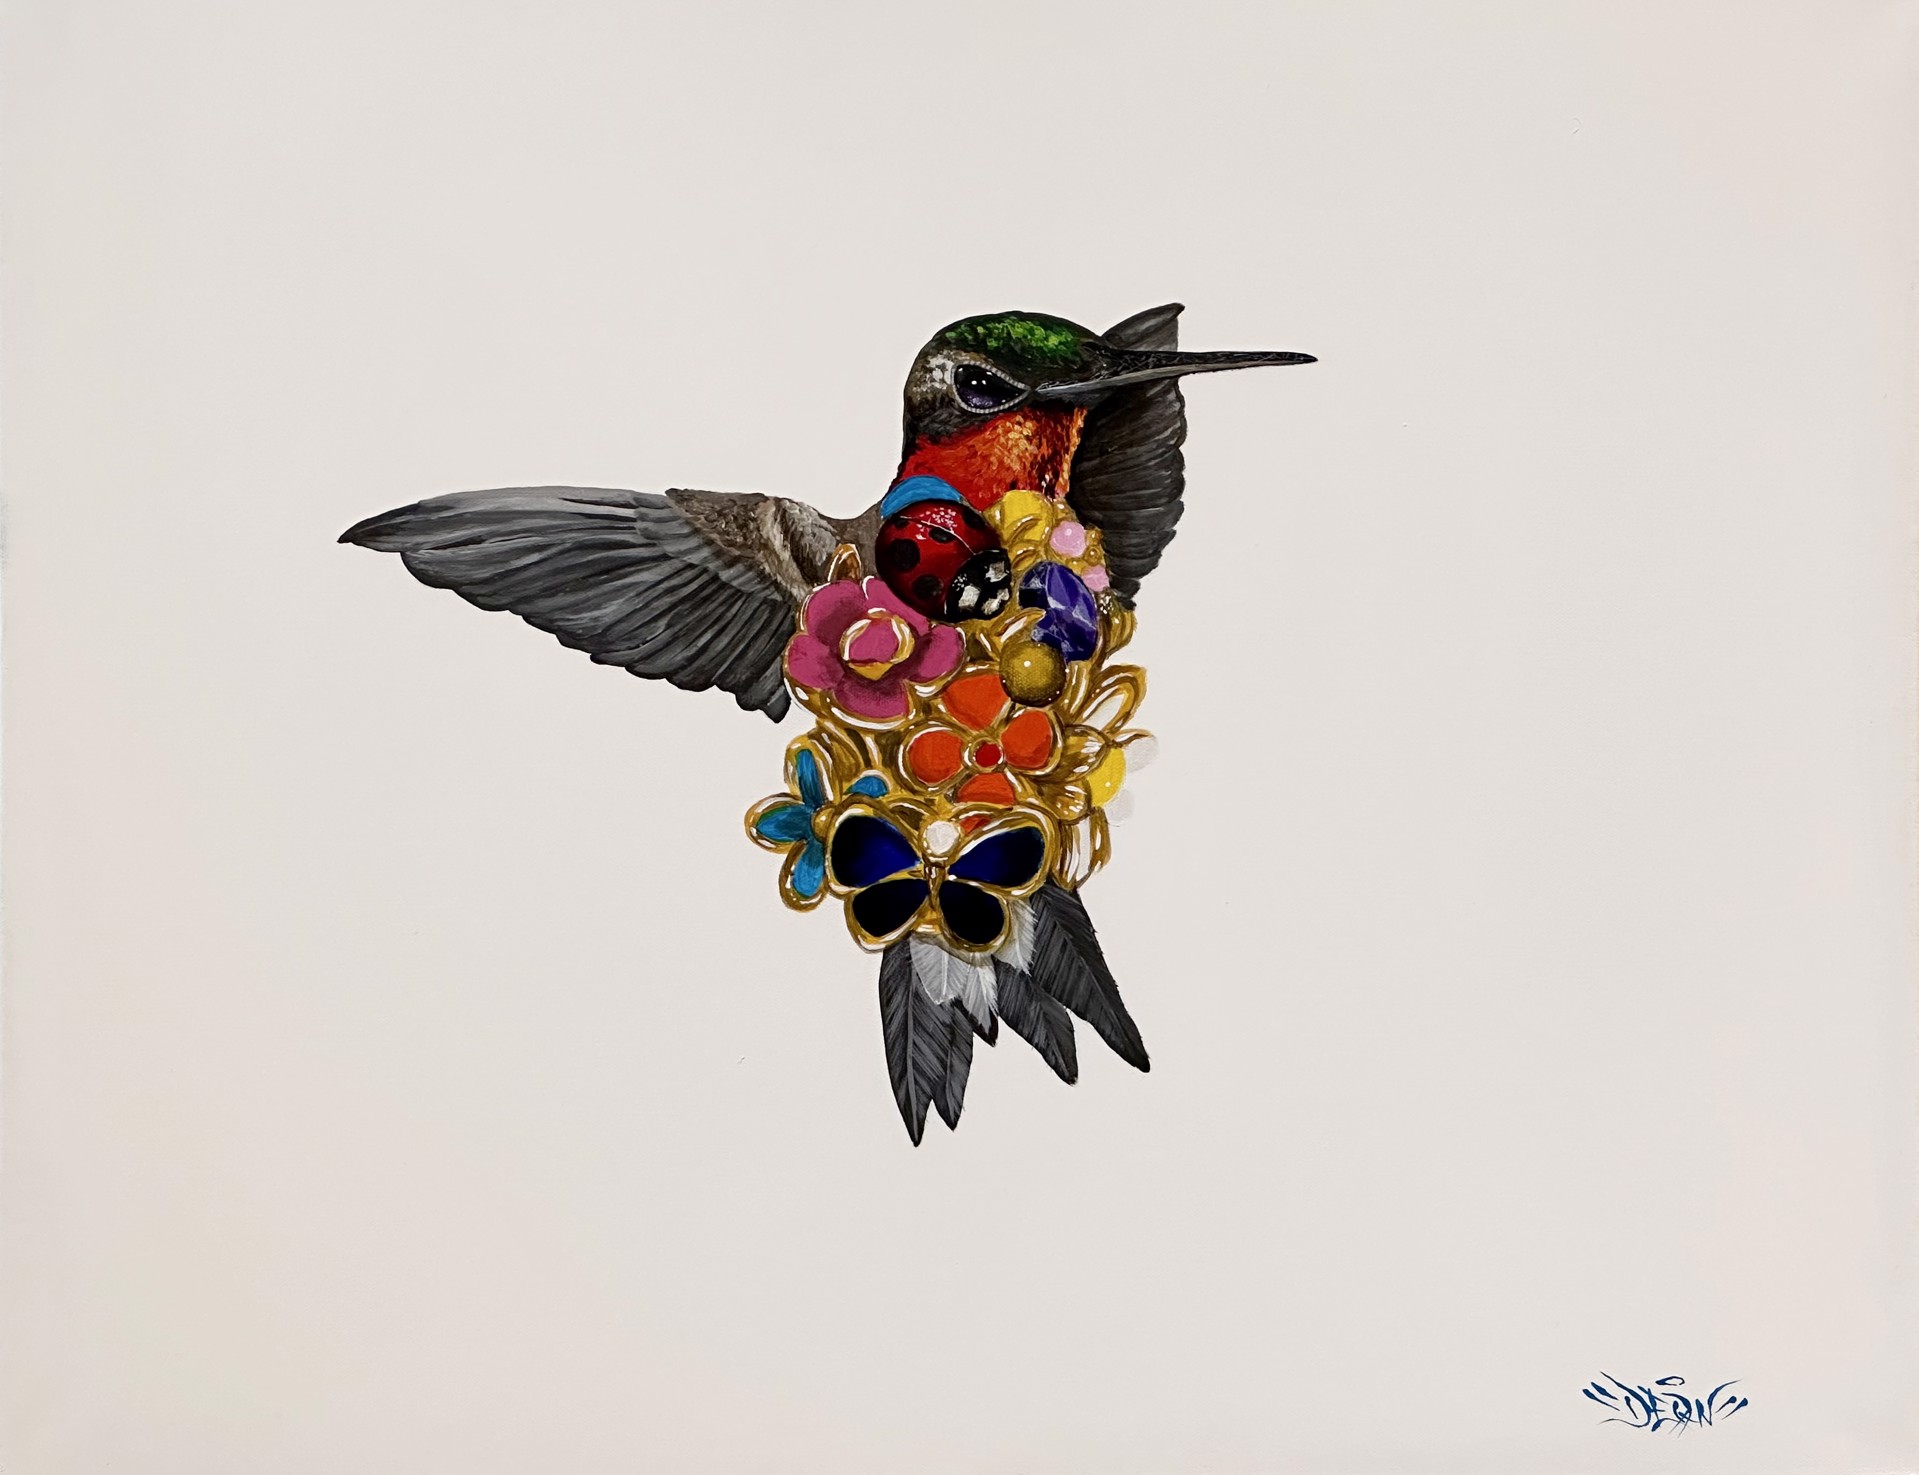 Dior Hummingbird by Anthony Deon